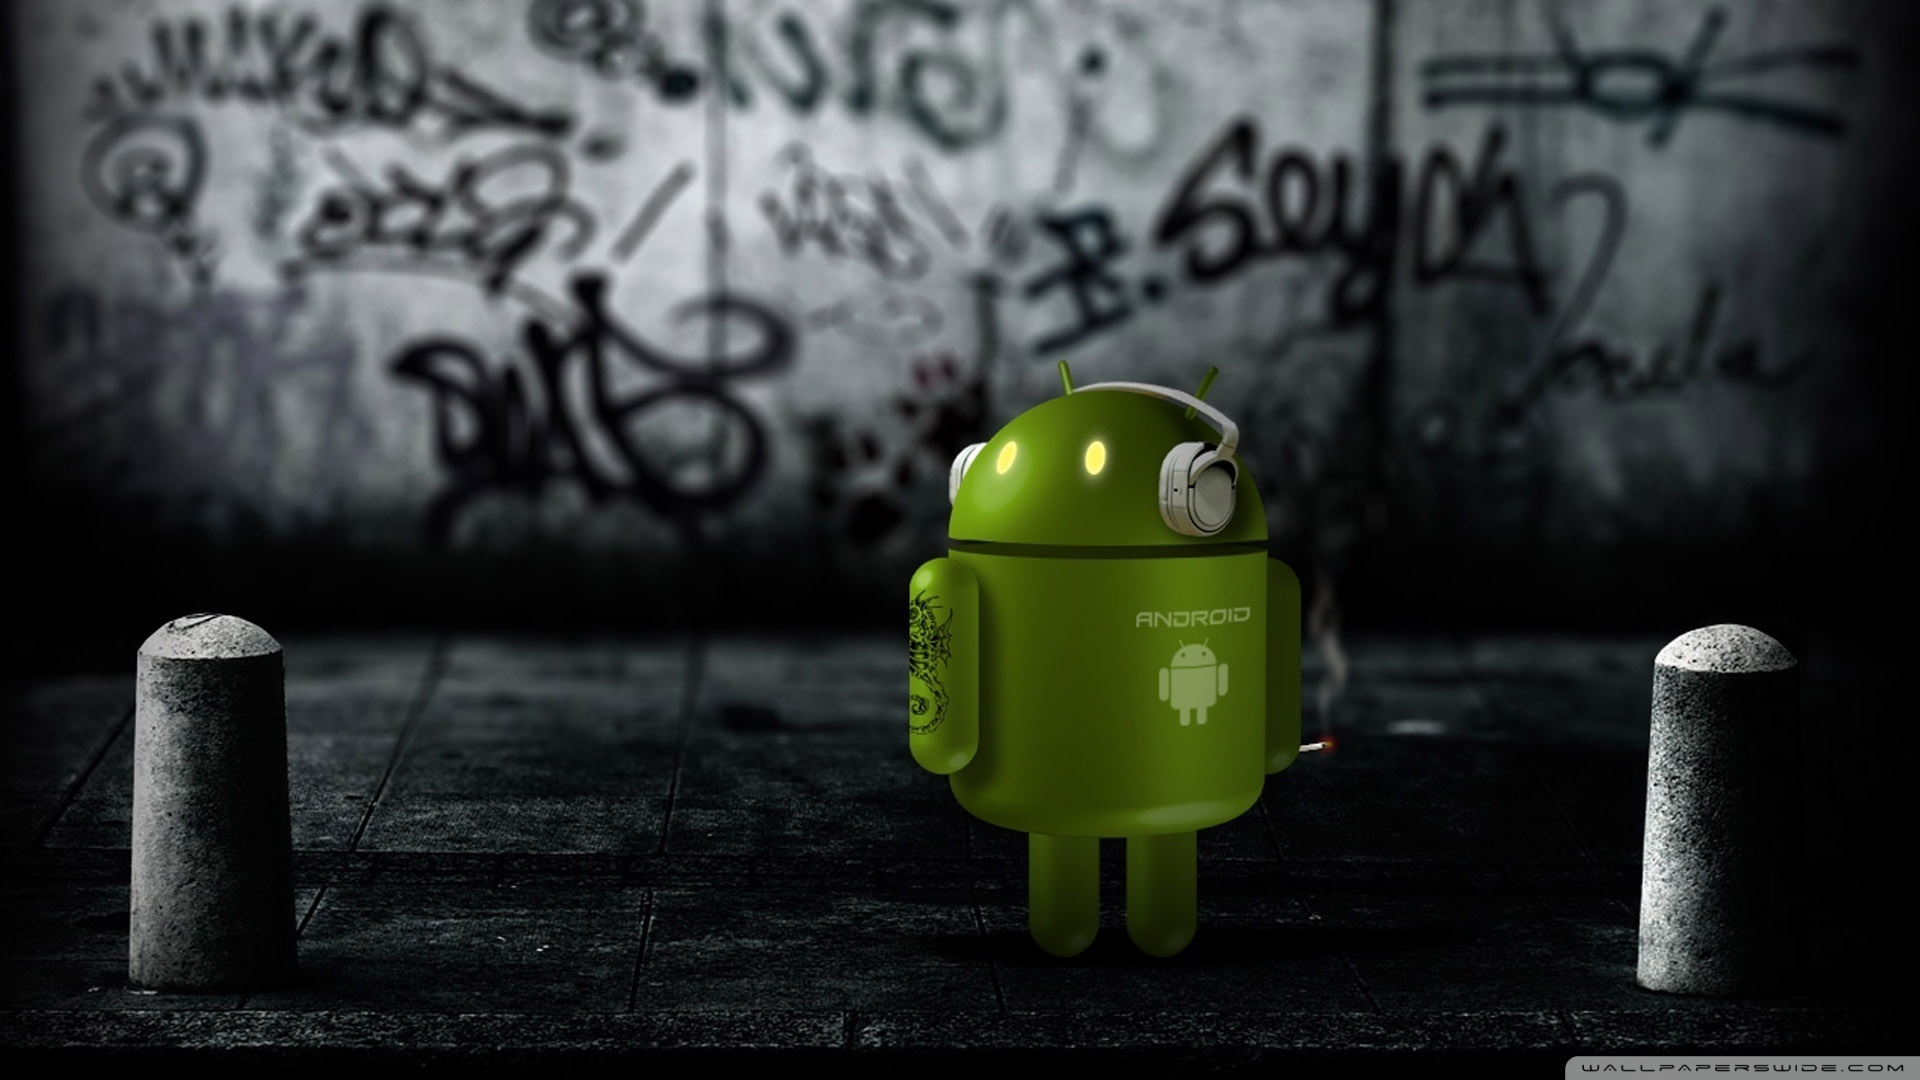 Android Robot Listening To Music Wallpaper 1920x1080 Android Robot